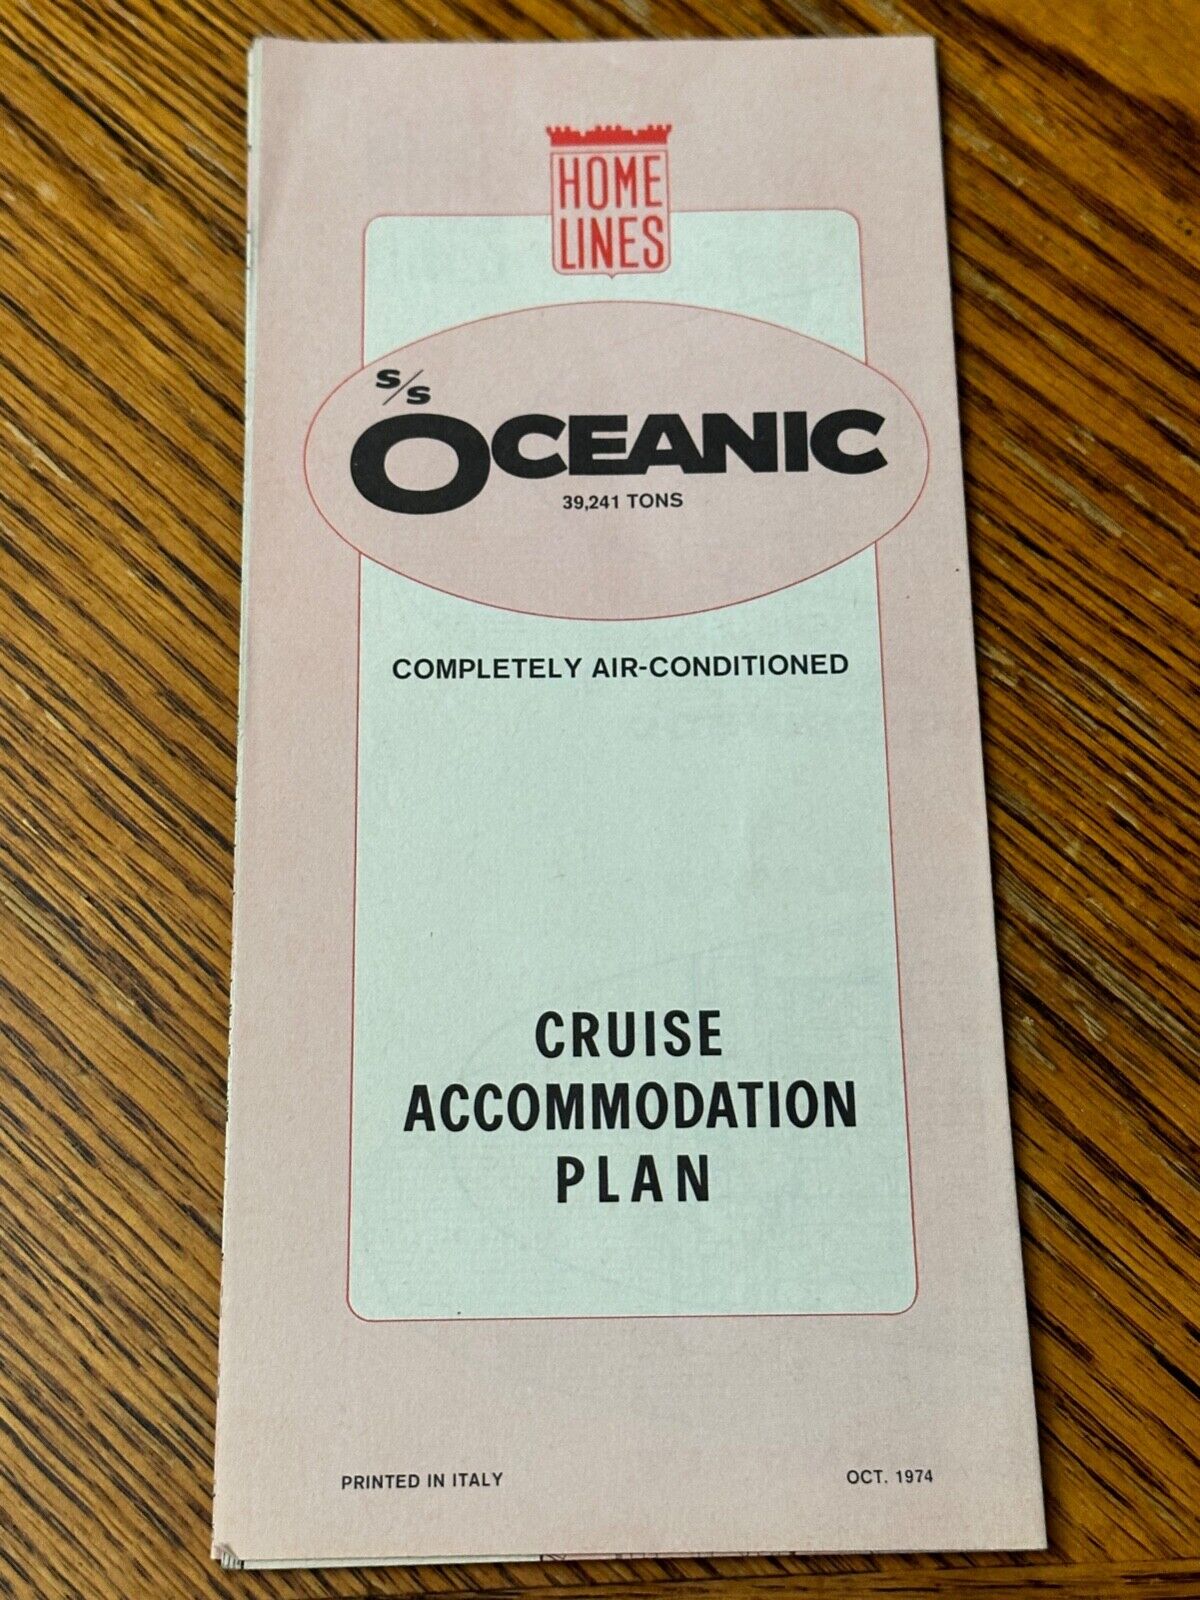 Home Lines SS Oceanic Cruise Accommodation Plan Ship Layout Map 1974 VTG